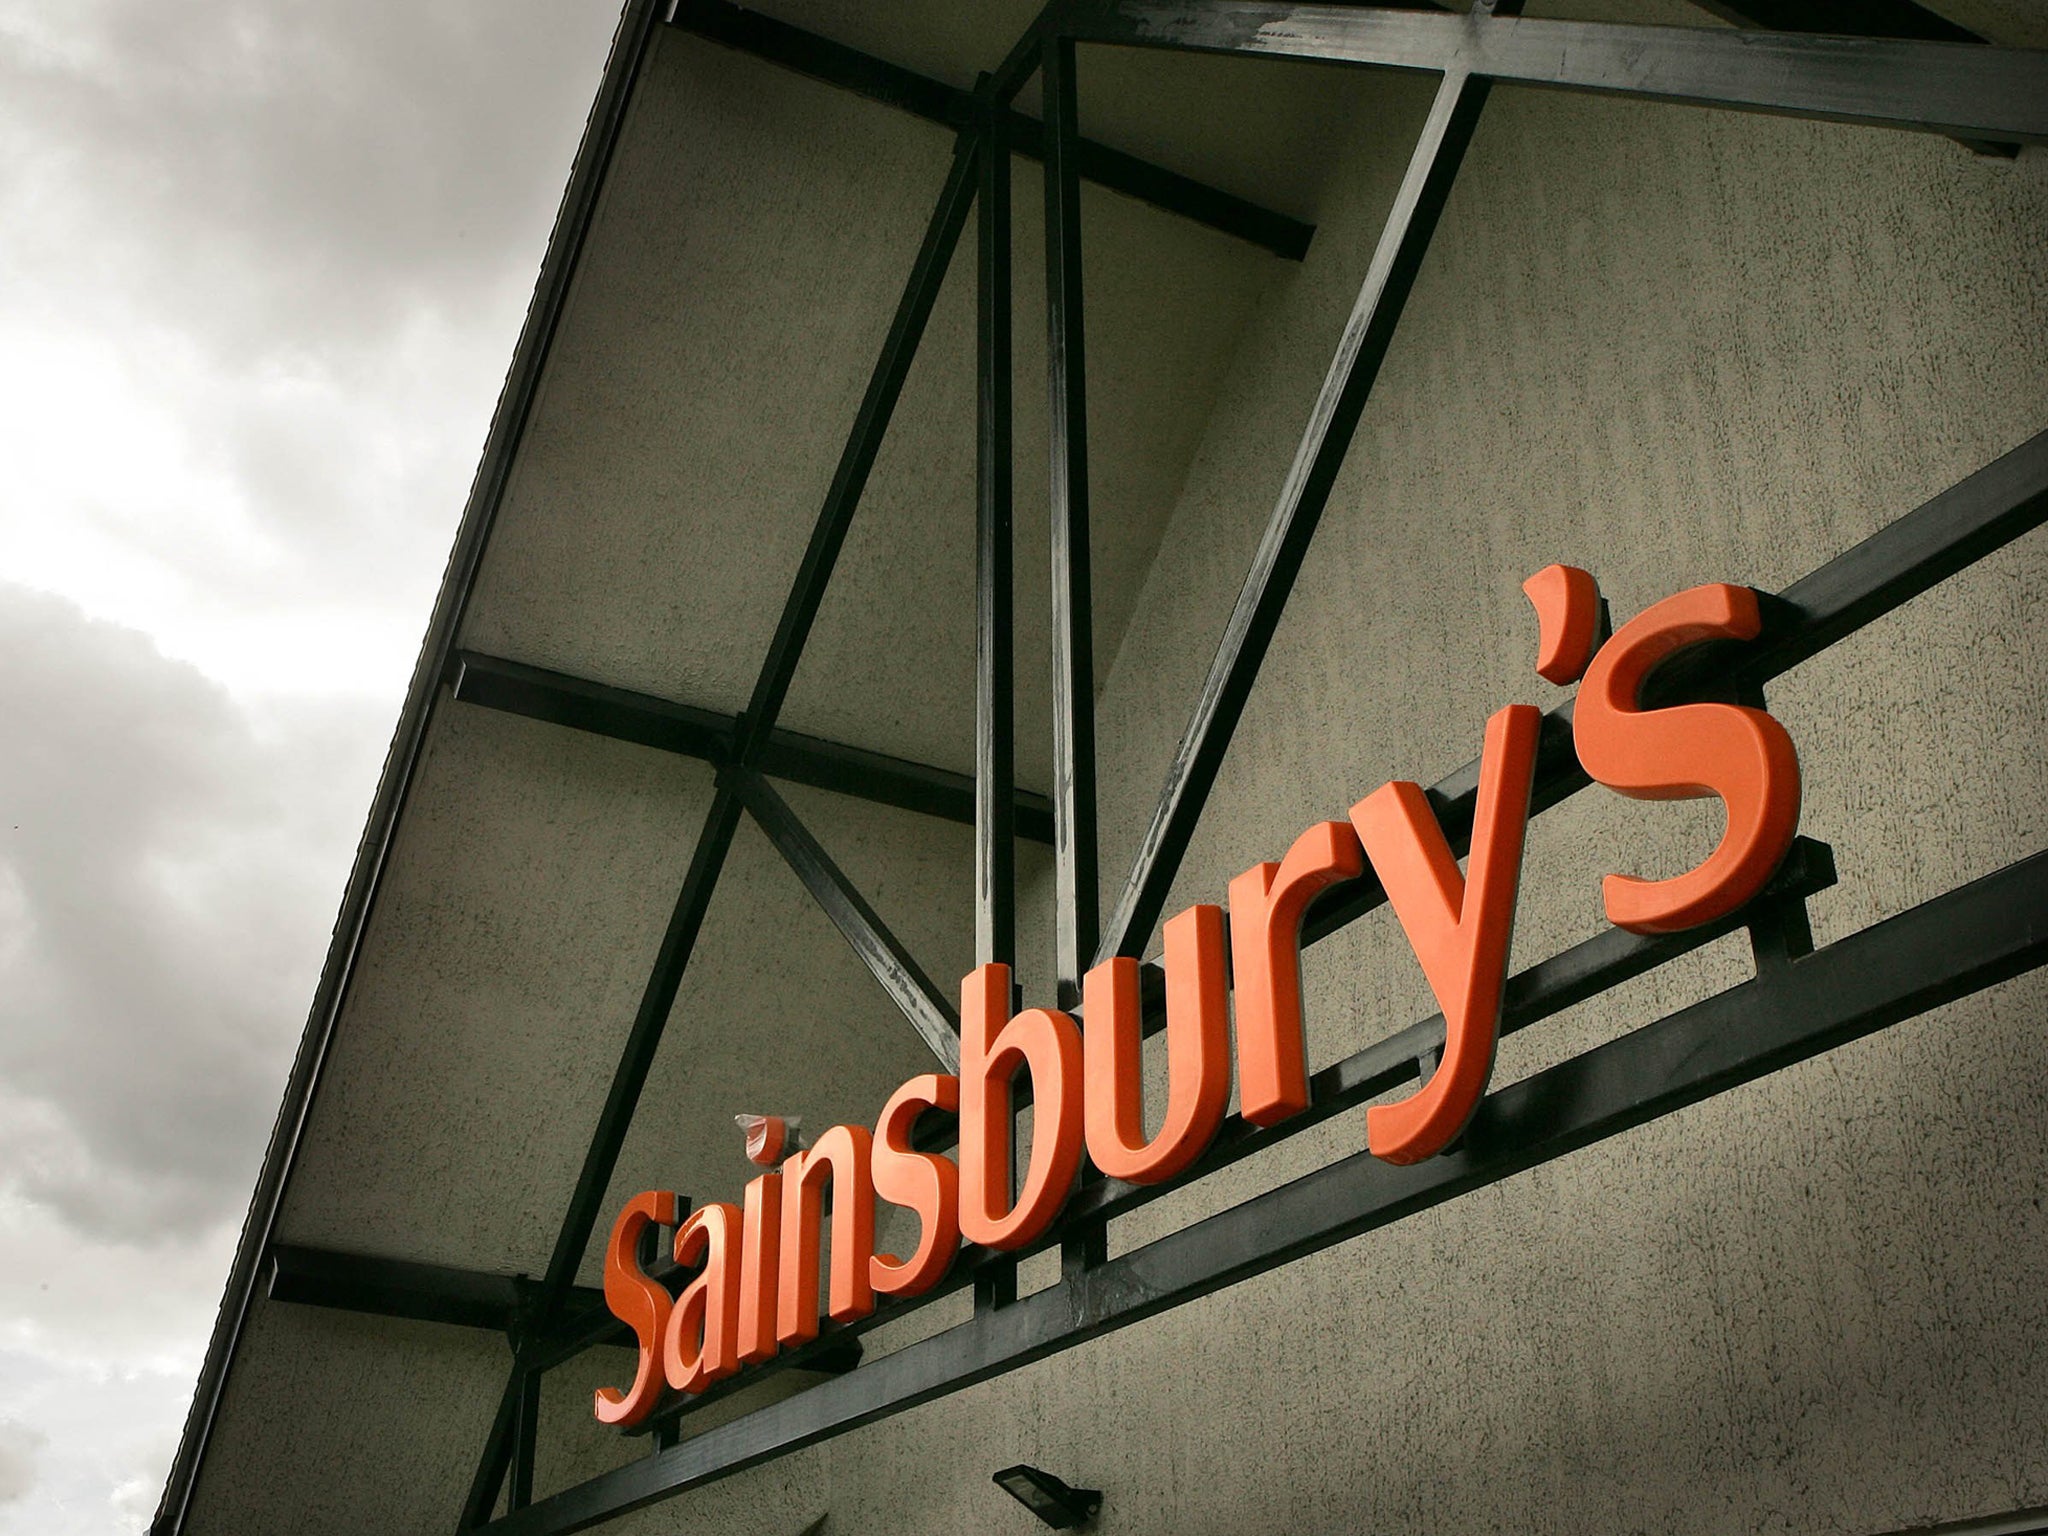 Sainsbury's is leading the fight back against discount chains Aldi and Lidl